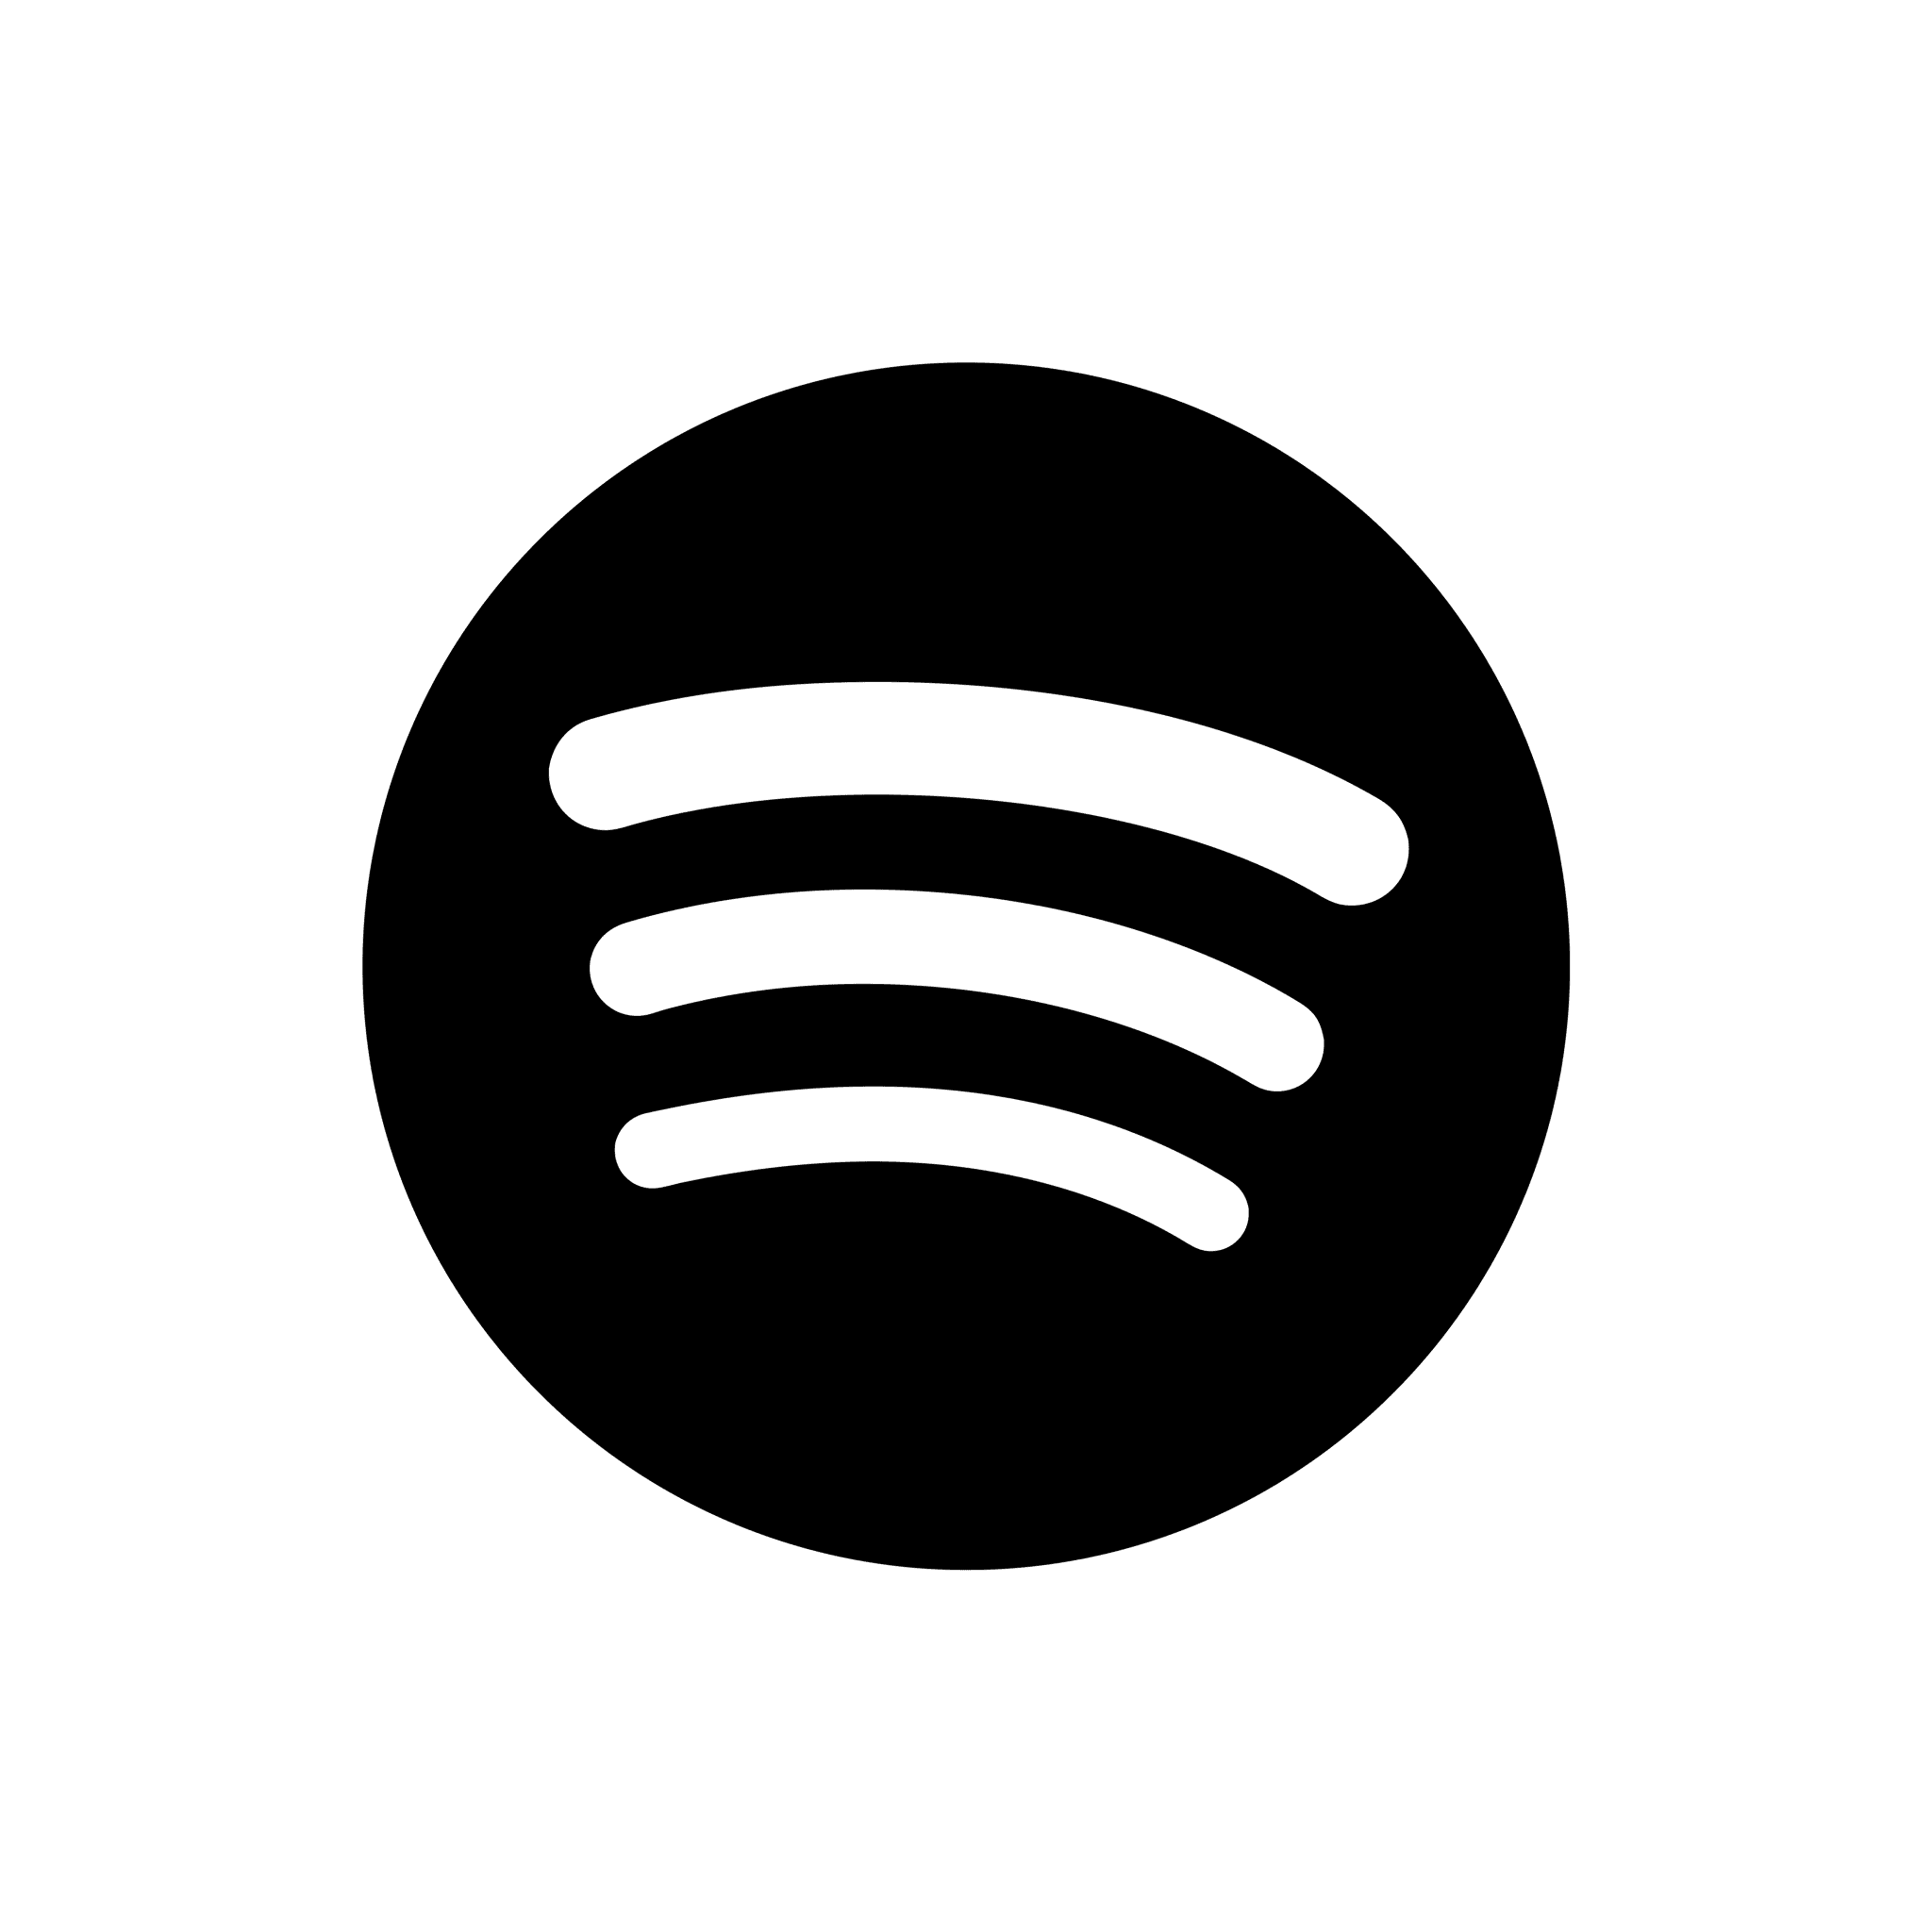 spotify logo png white transparent background